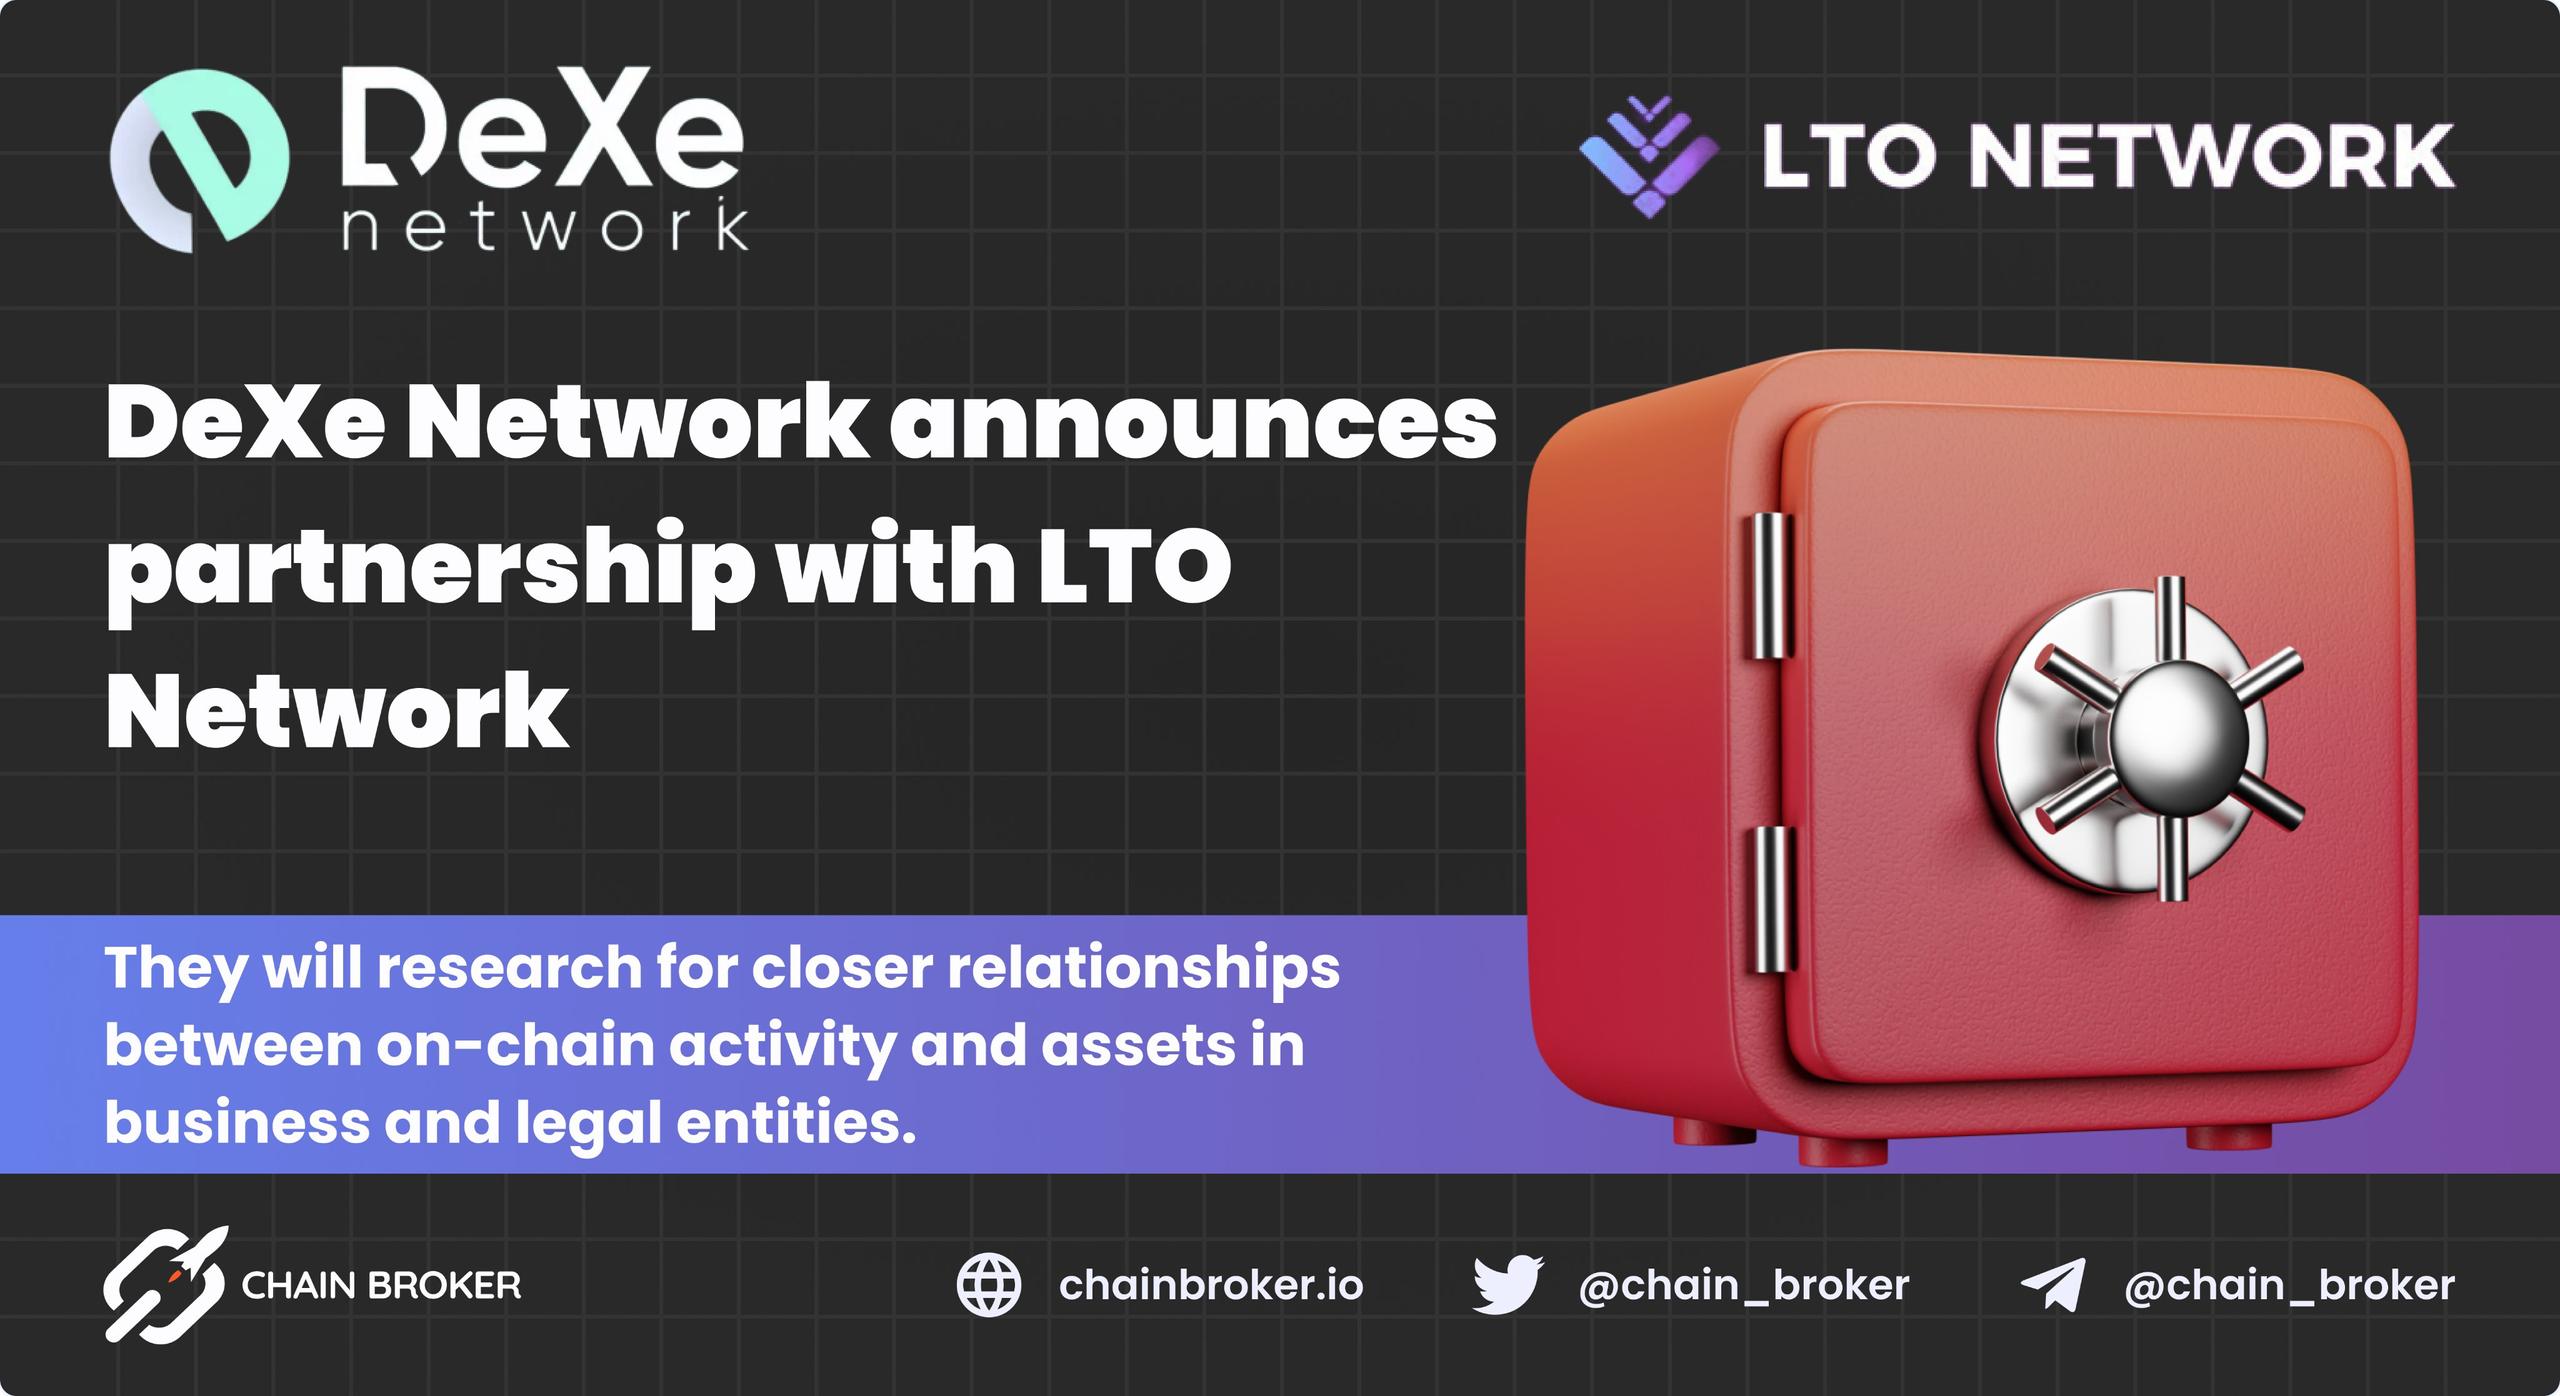 DeXe Network has announced partnership with LTO Network